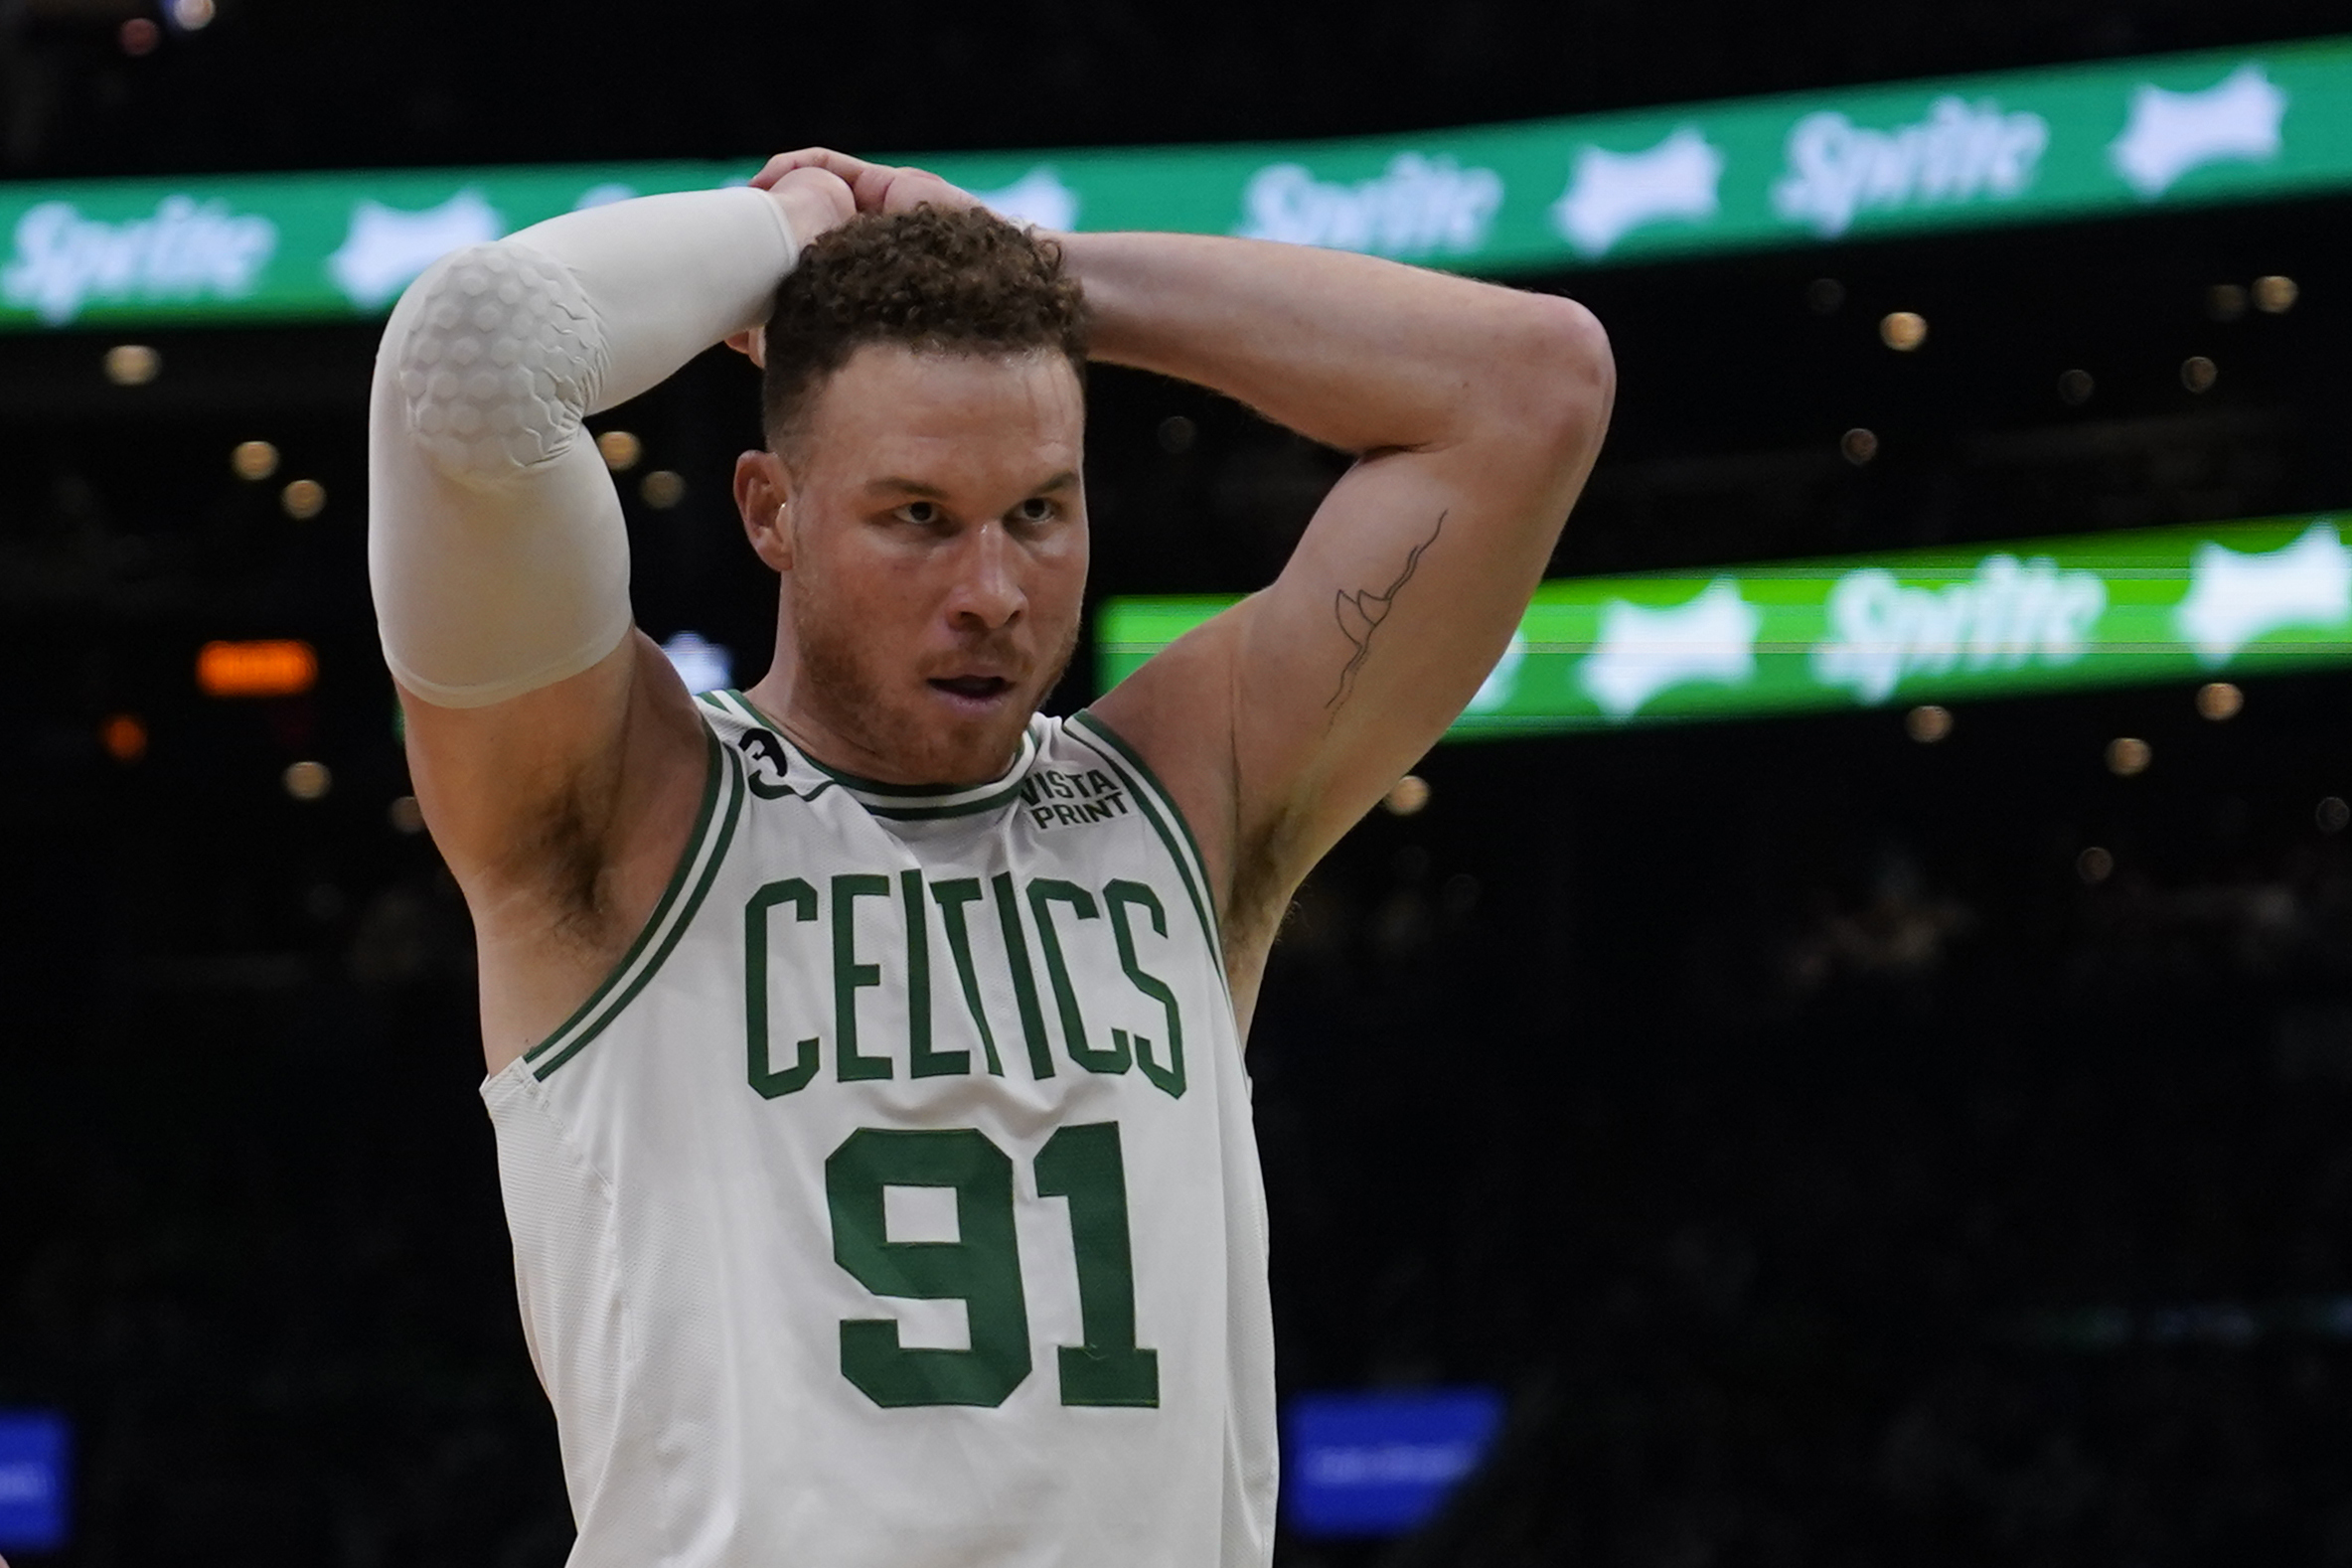 Celtics players begged Blake Griffin to rejoin roster during